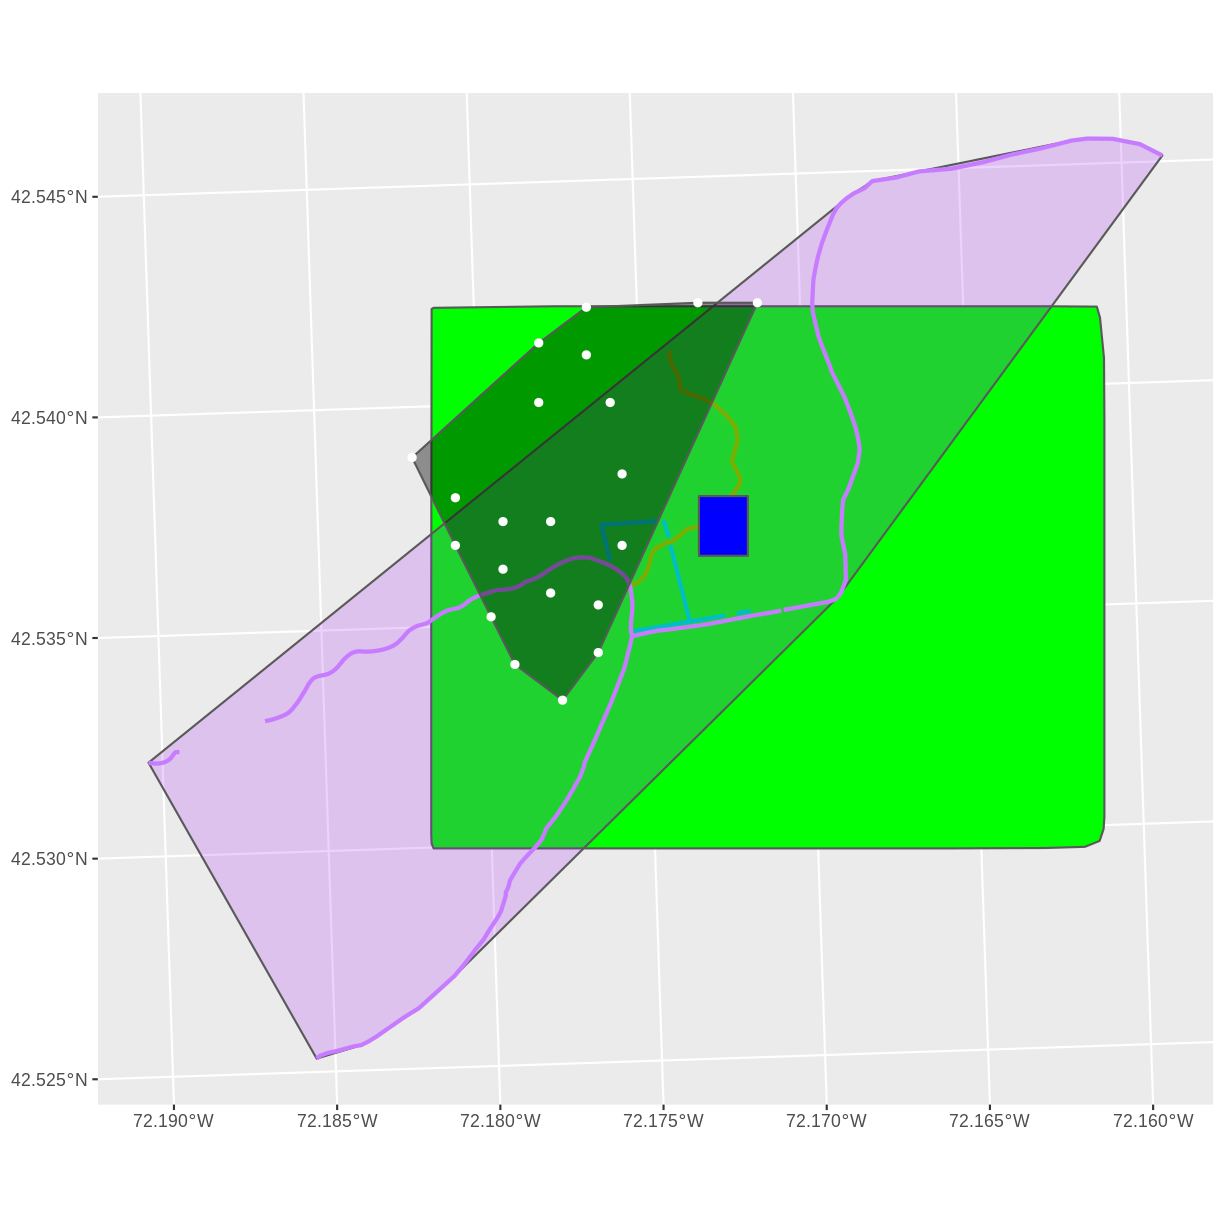 plot of chunk compare-data-extents